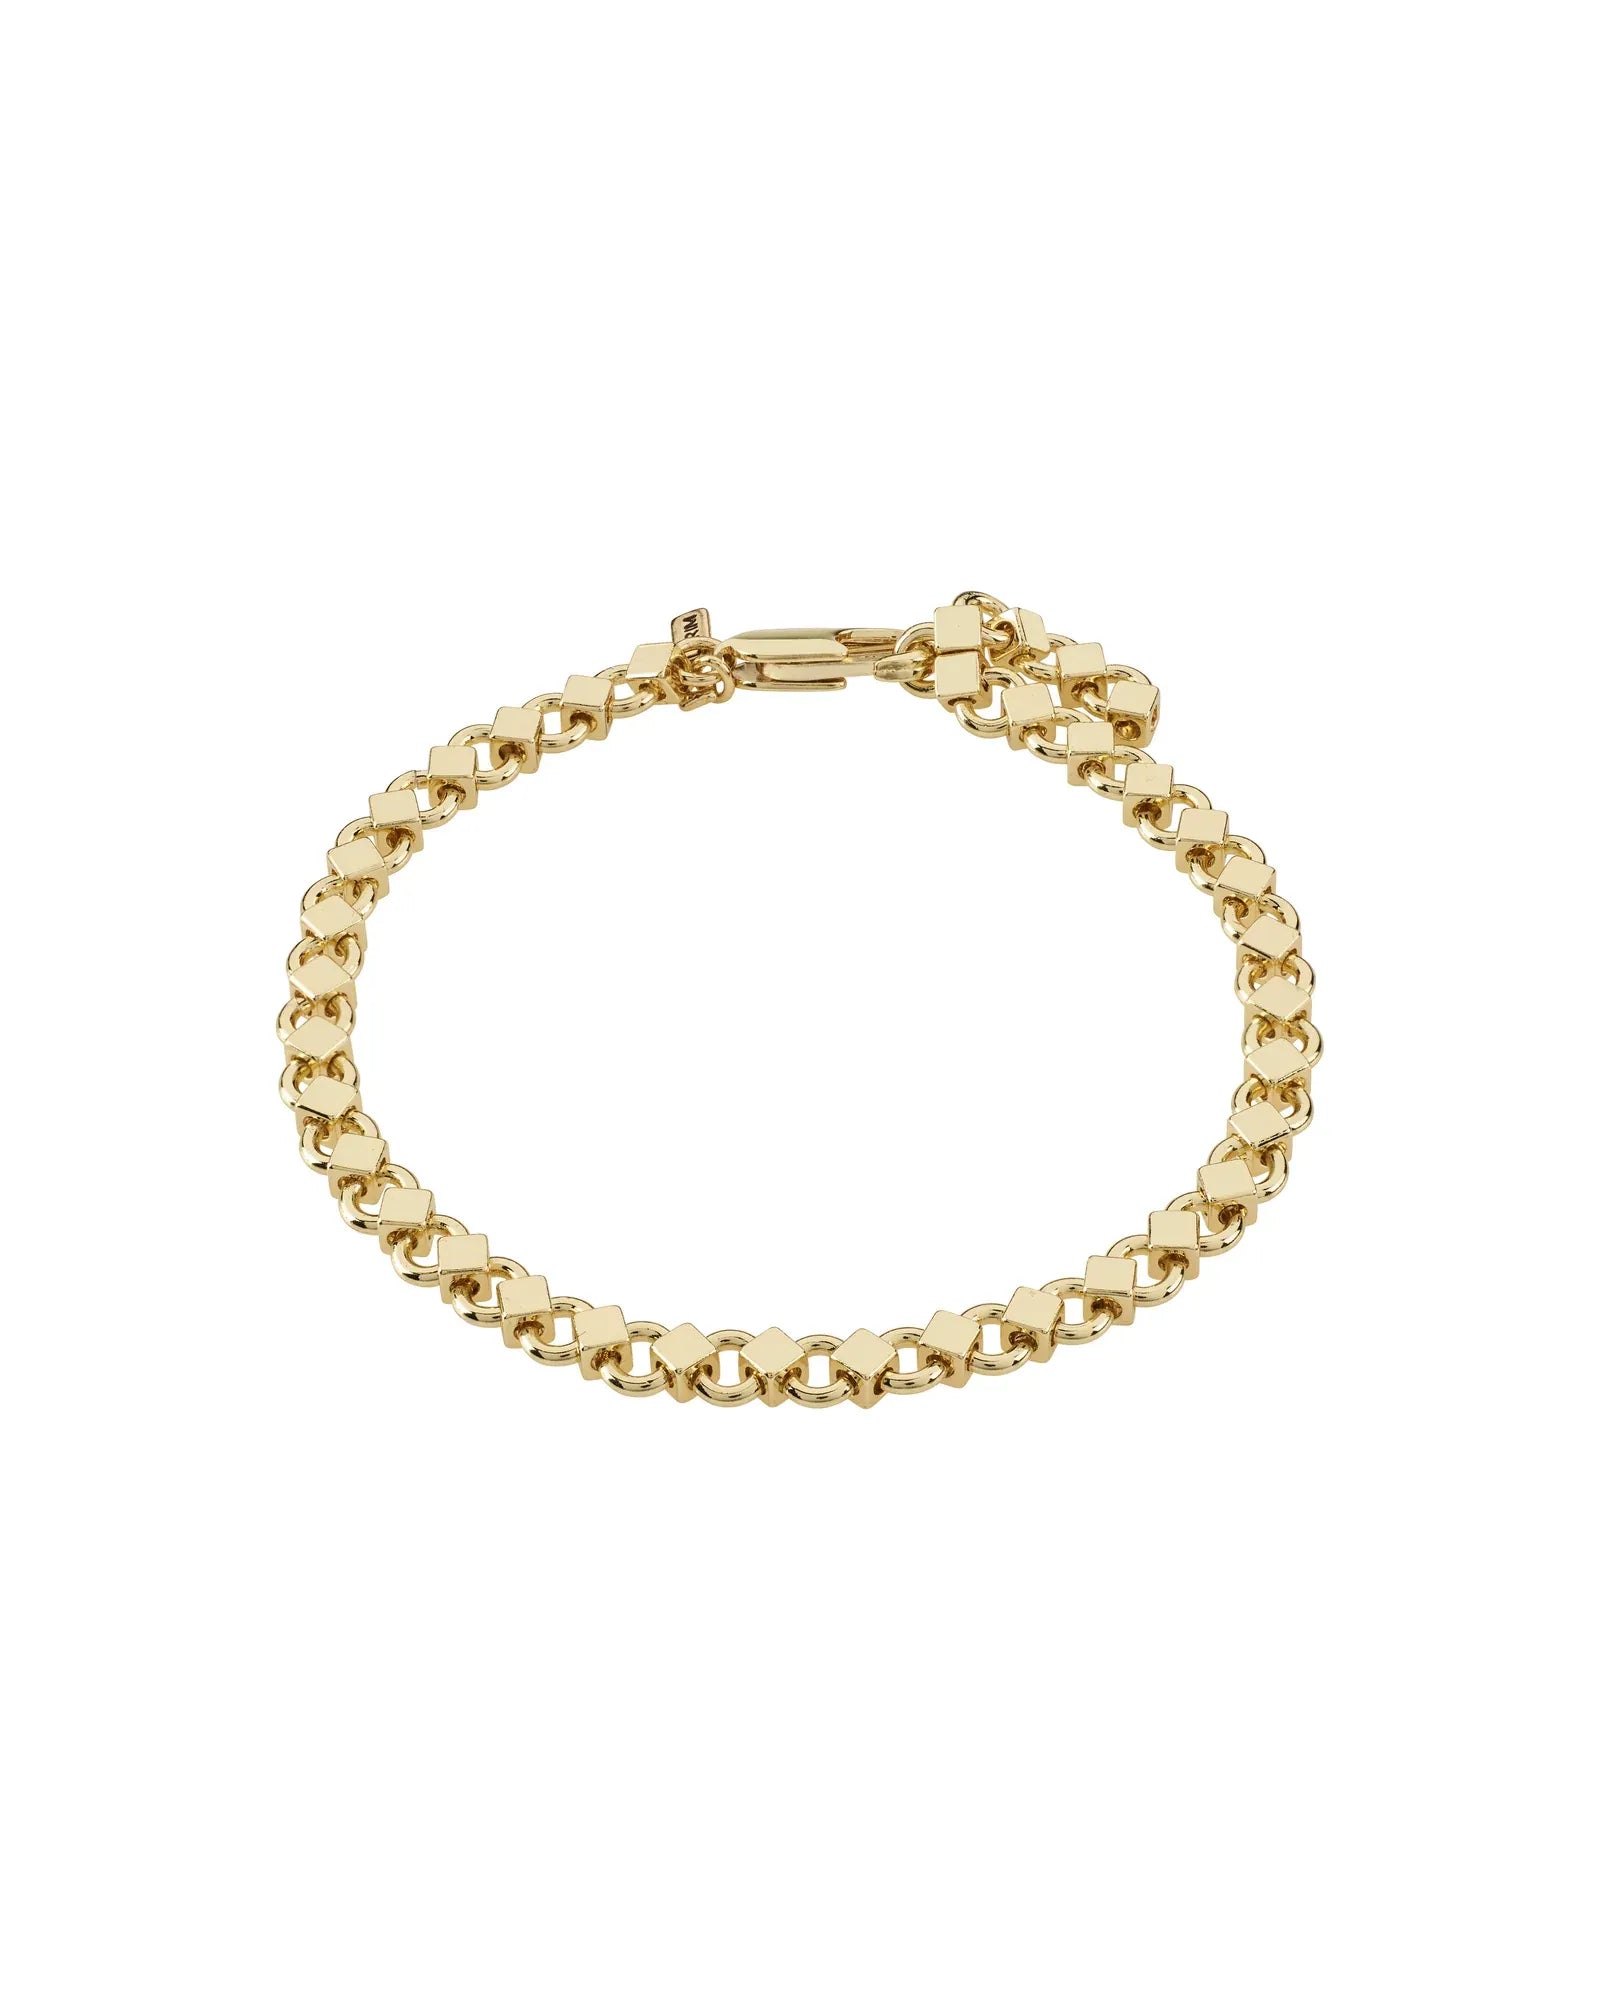 DESIREE Recycled Bracelet - Gold Plated